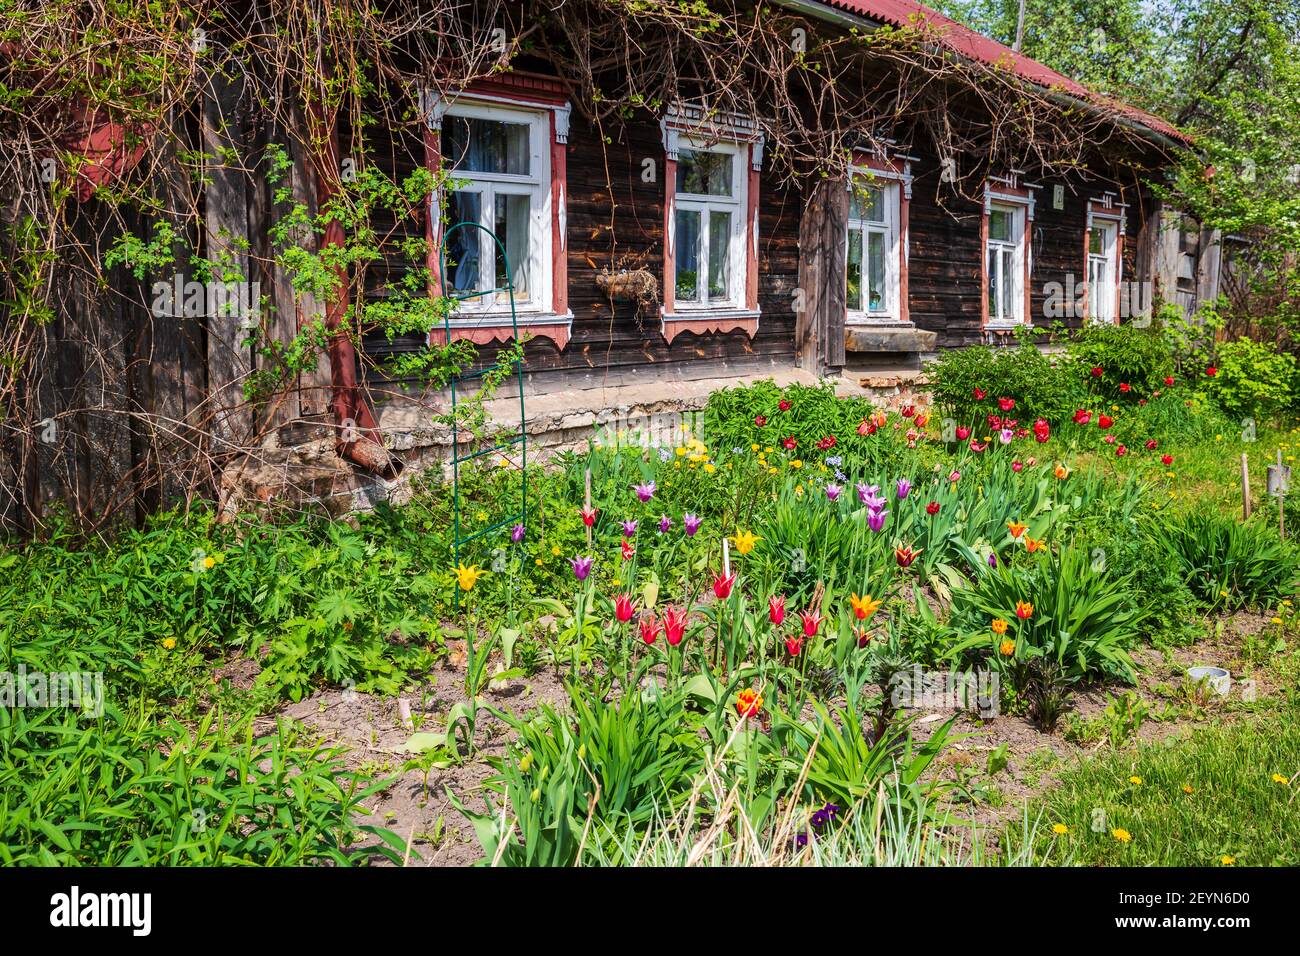 Typical rustic Russian wooden house with flowers in the front garden under the windows Stock Photo